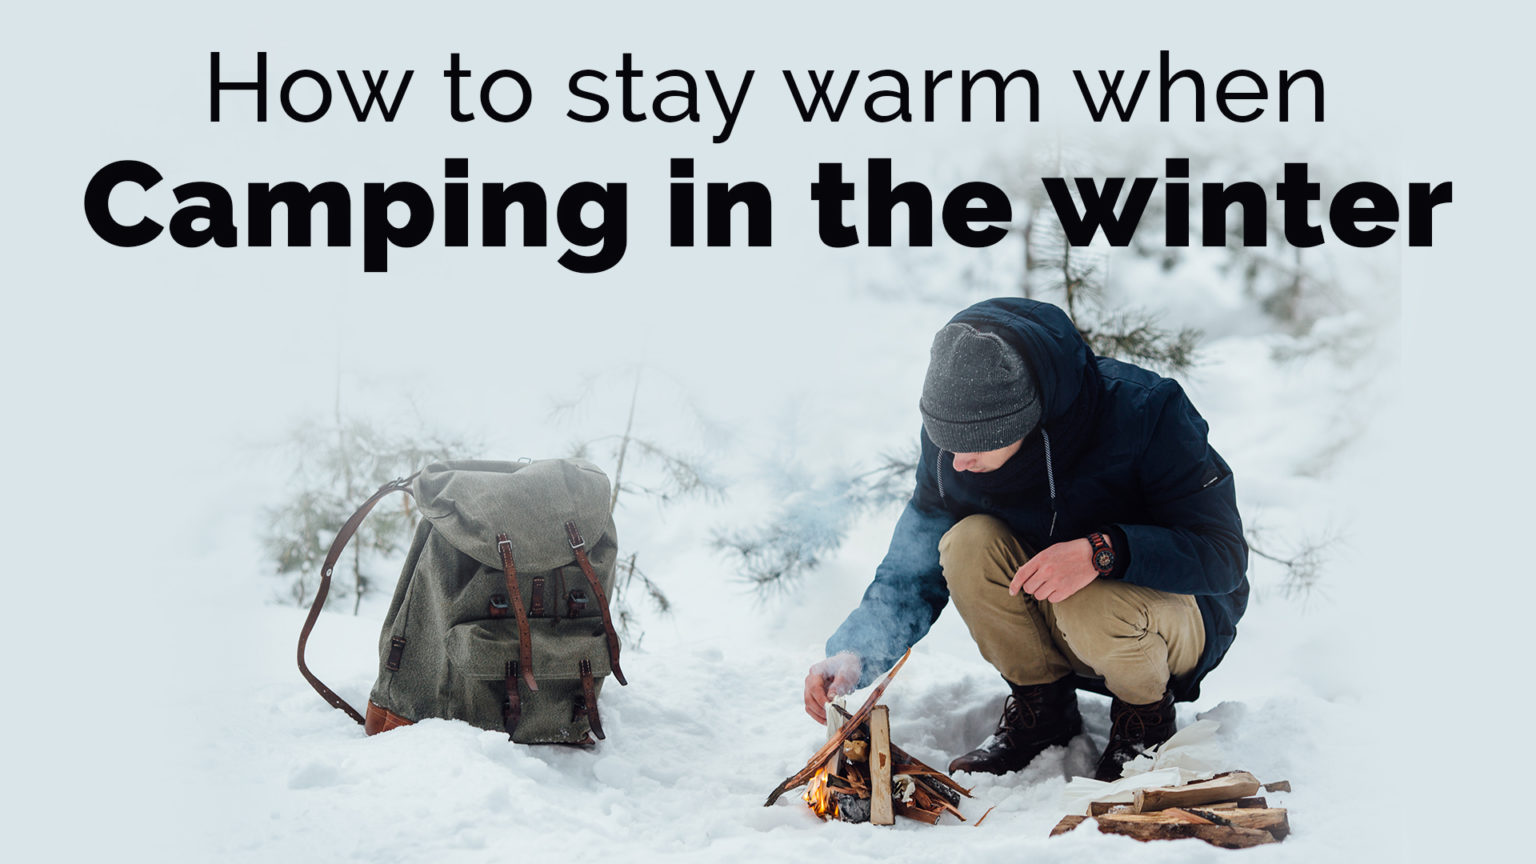 How To Stay Warm When Camping In The Winter